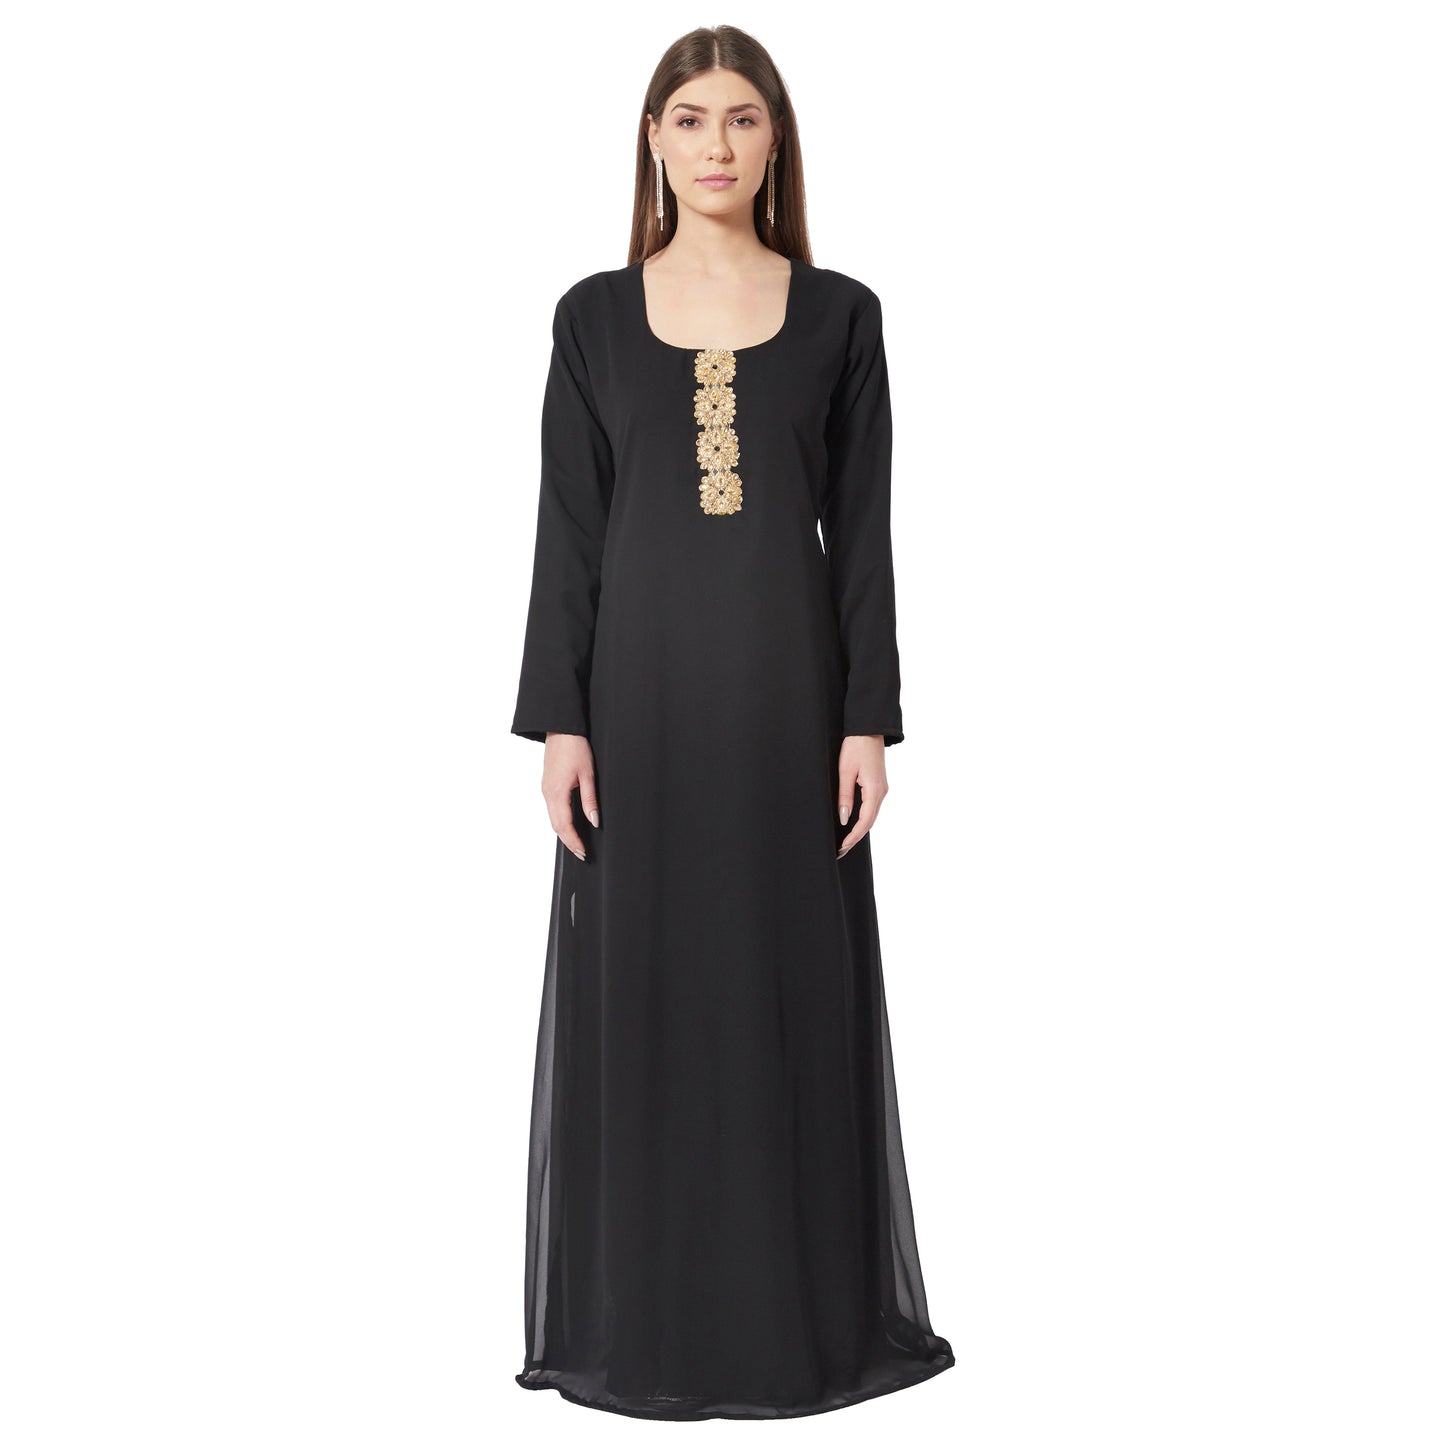 Load image into Gallery viewer, Black Wedding Gown Designer Maxi Dress with Threadwork Embroidery - Maxim Creation
